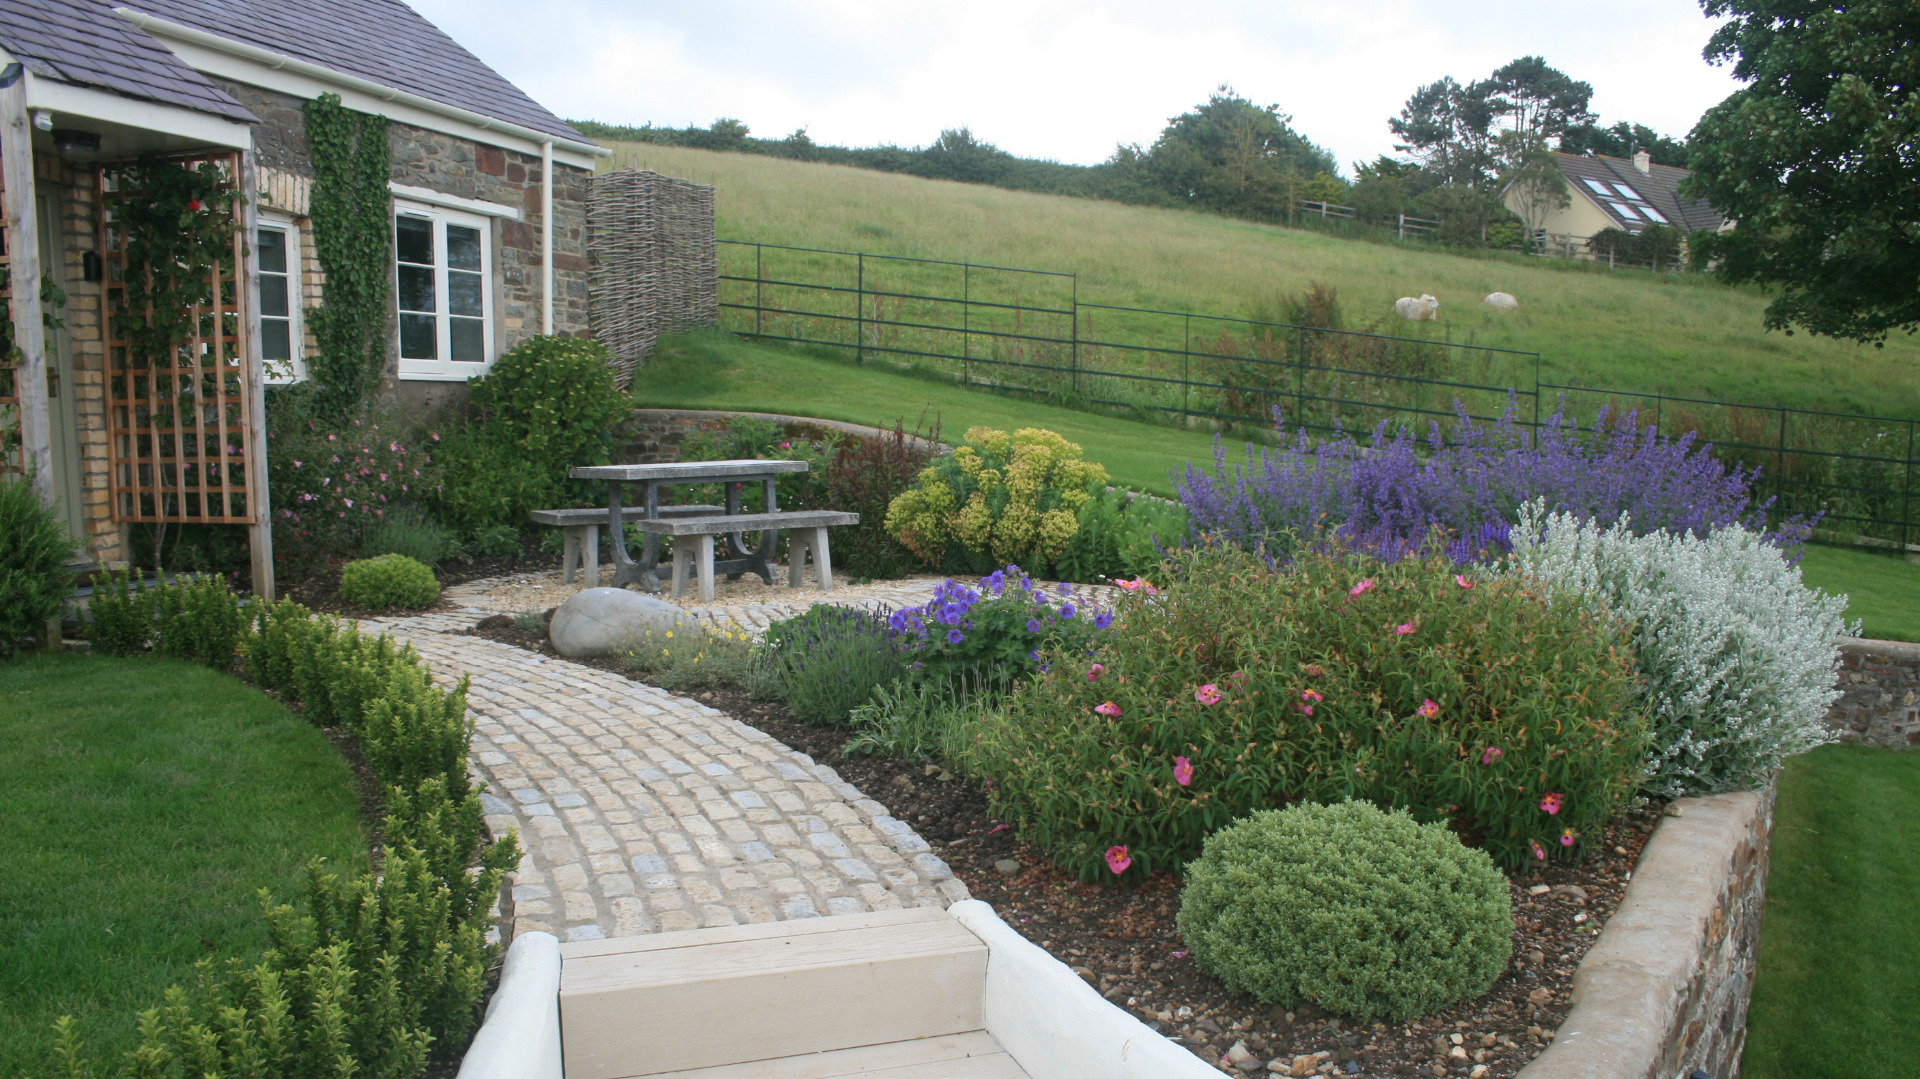 Alison Bockh Garden Design and Landscaping - North Devon - Building the steps to granny annexe complete with cottage garden